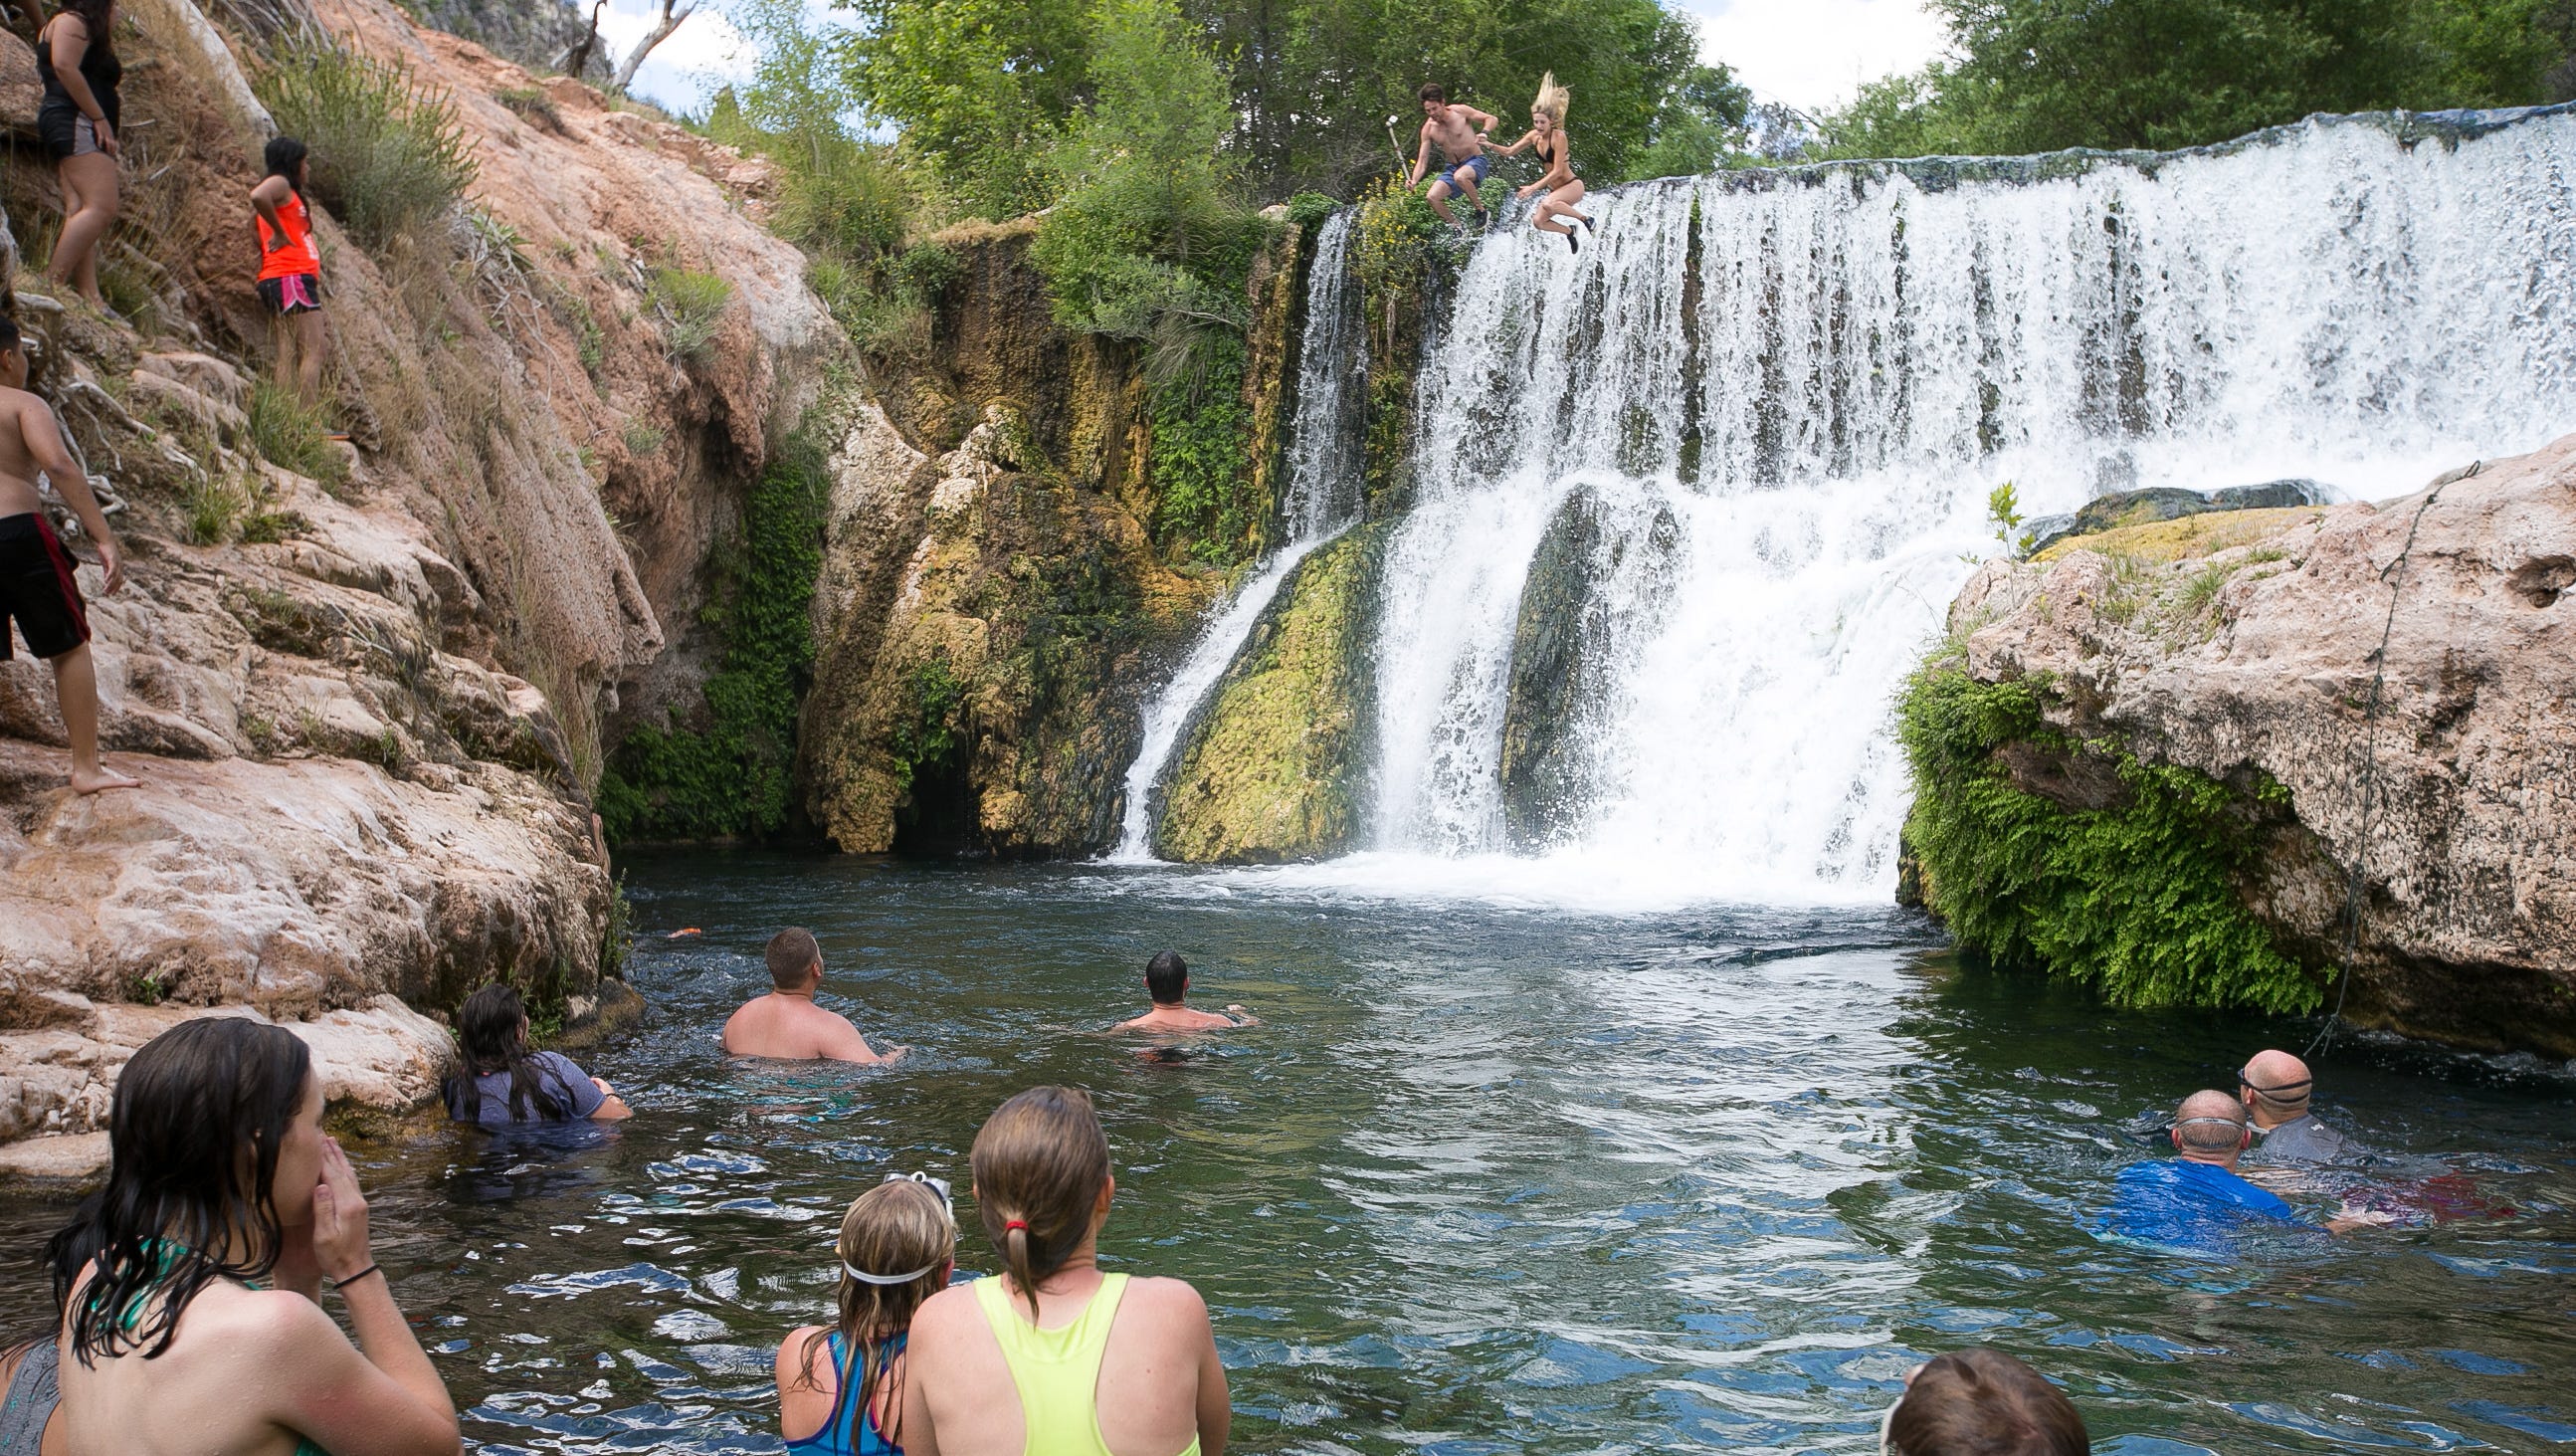 Visiting Fossil Creek? As of May 1, you need a permit